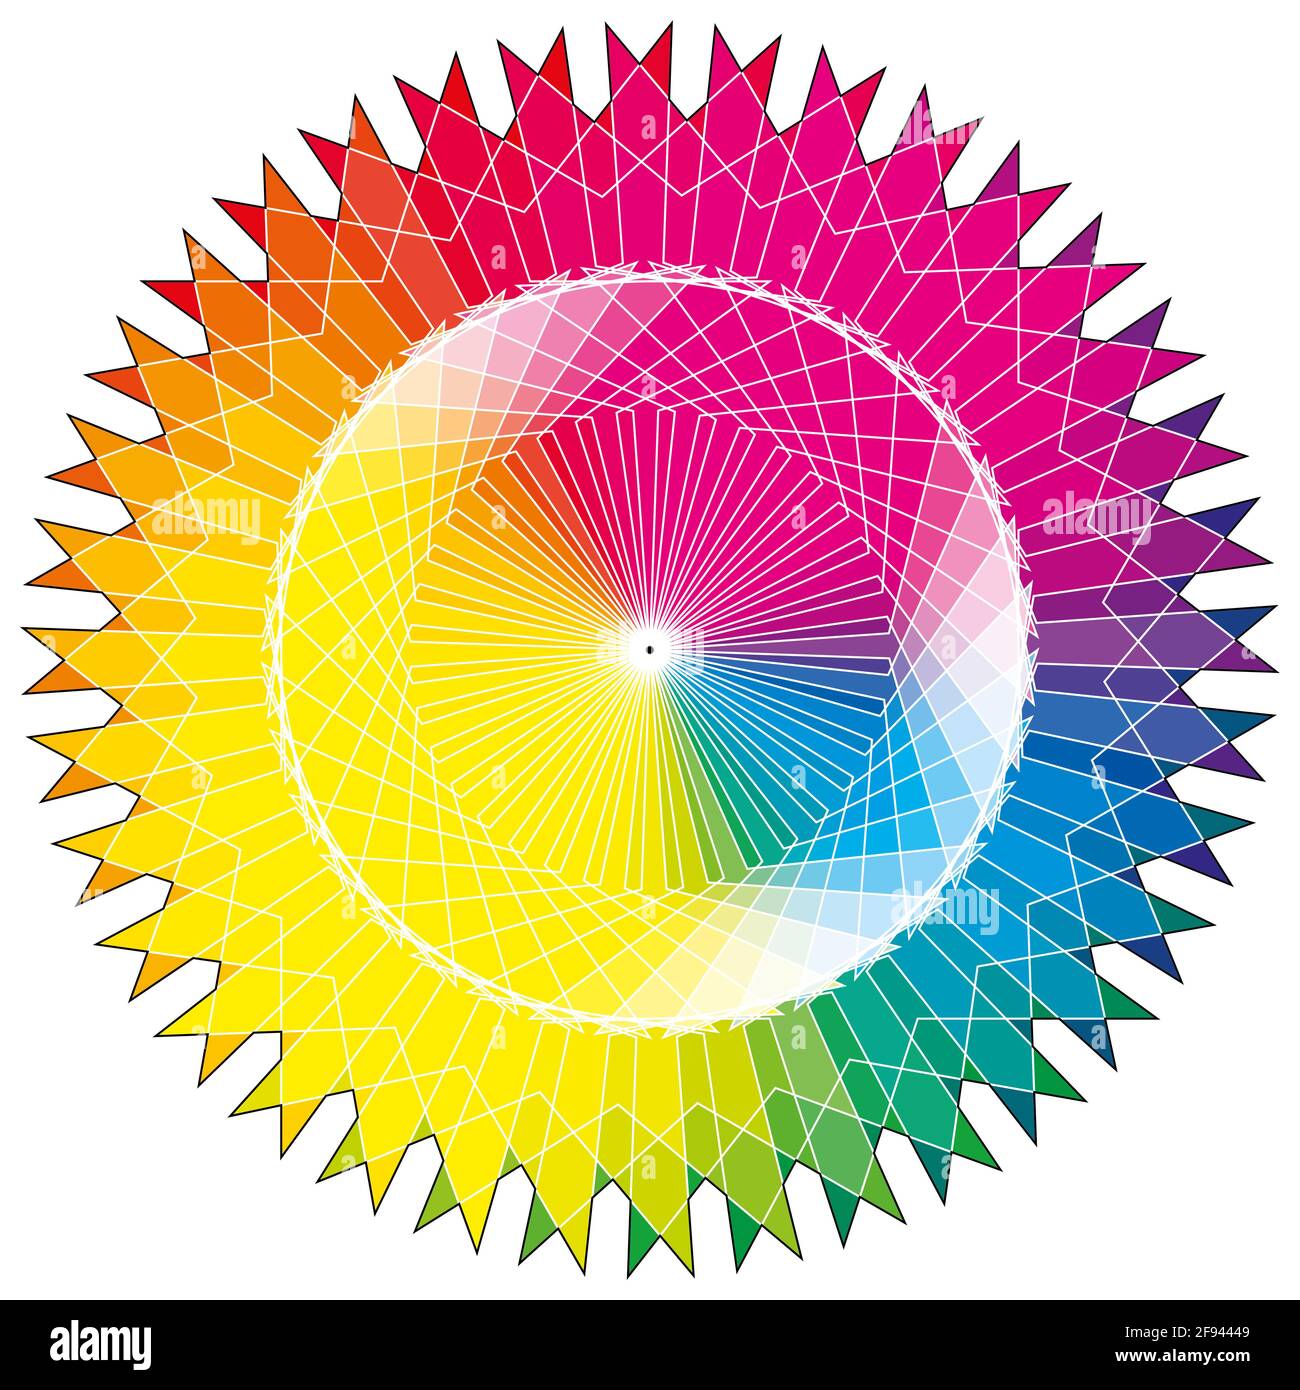 Color wheel Cut Out Stock Images & Pictures - Alamy